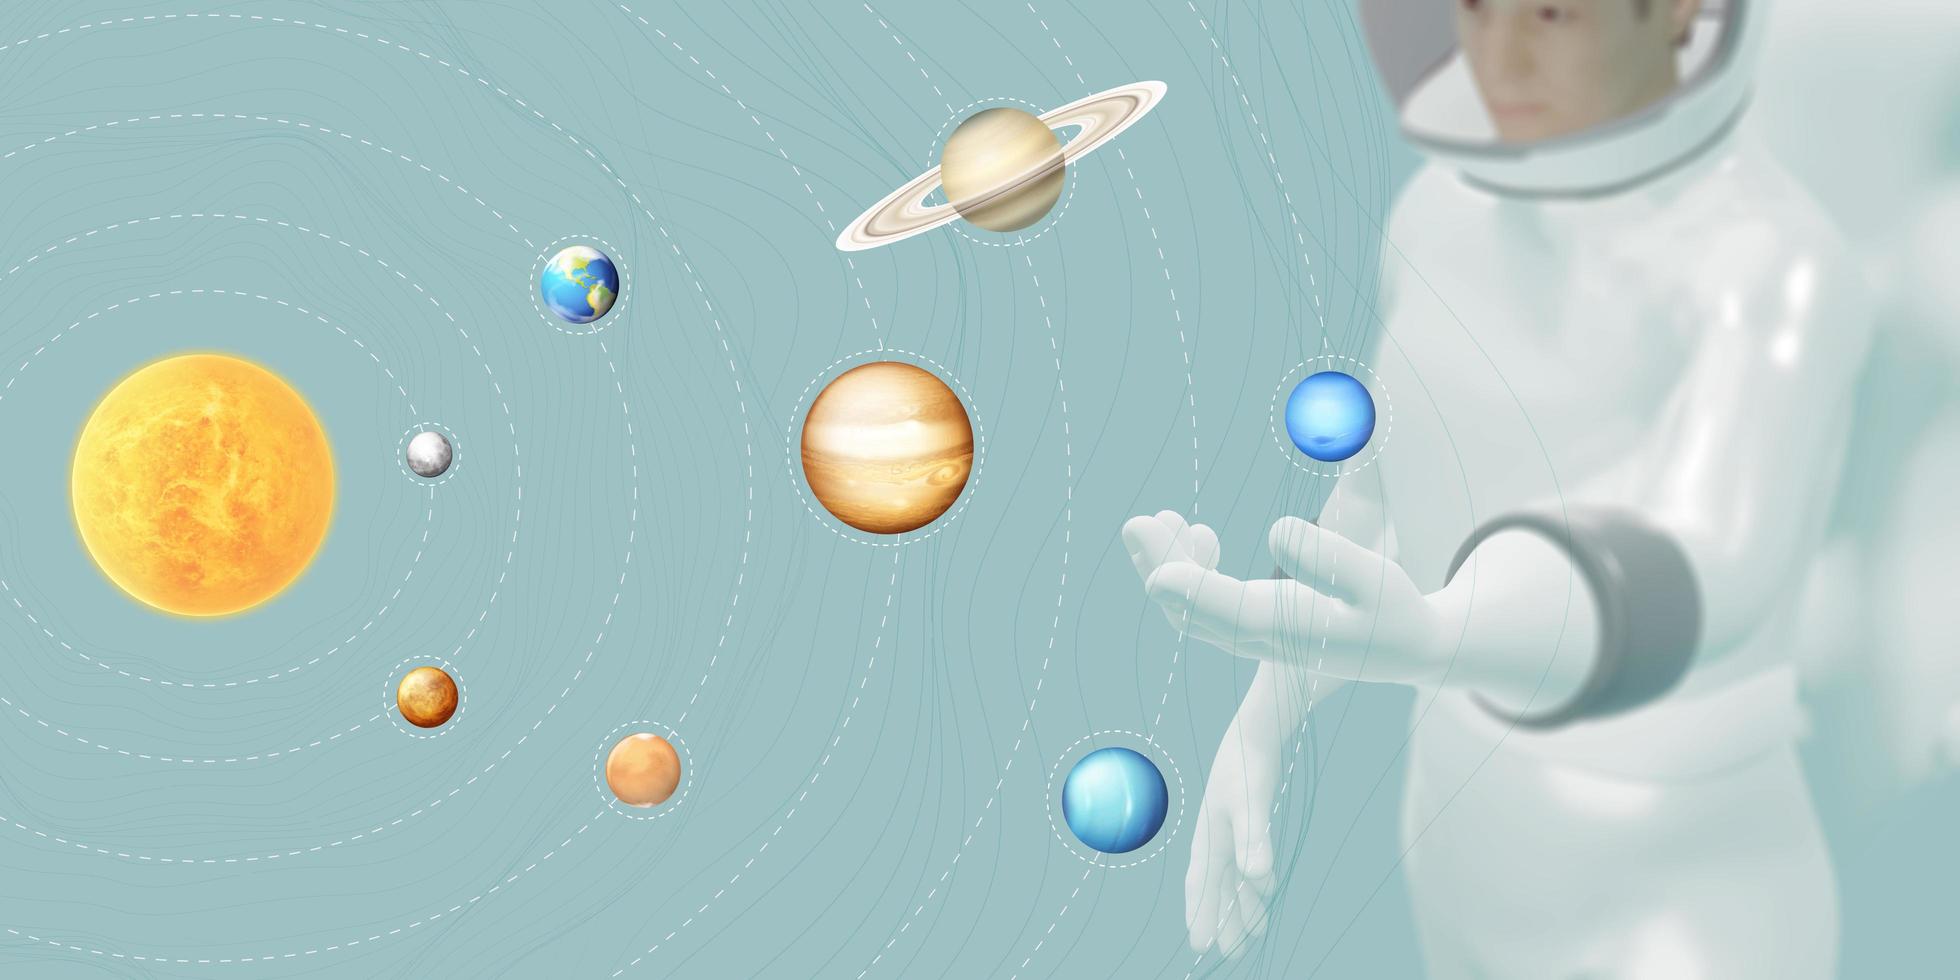 astronauts and solar system planets and stars 3d illustration of photo